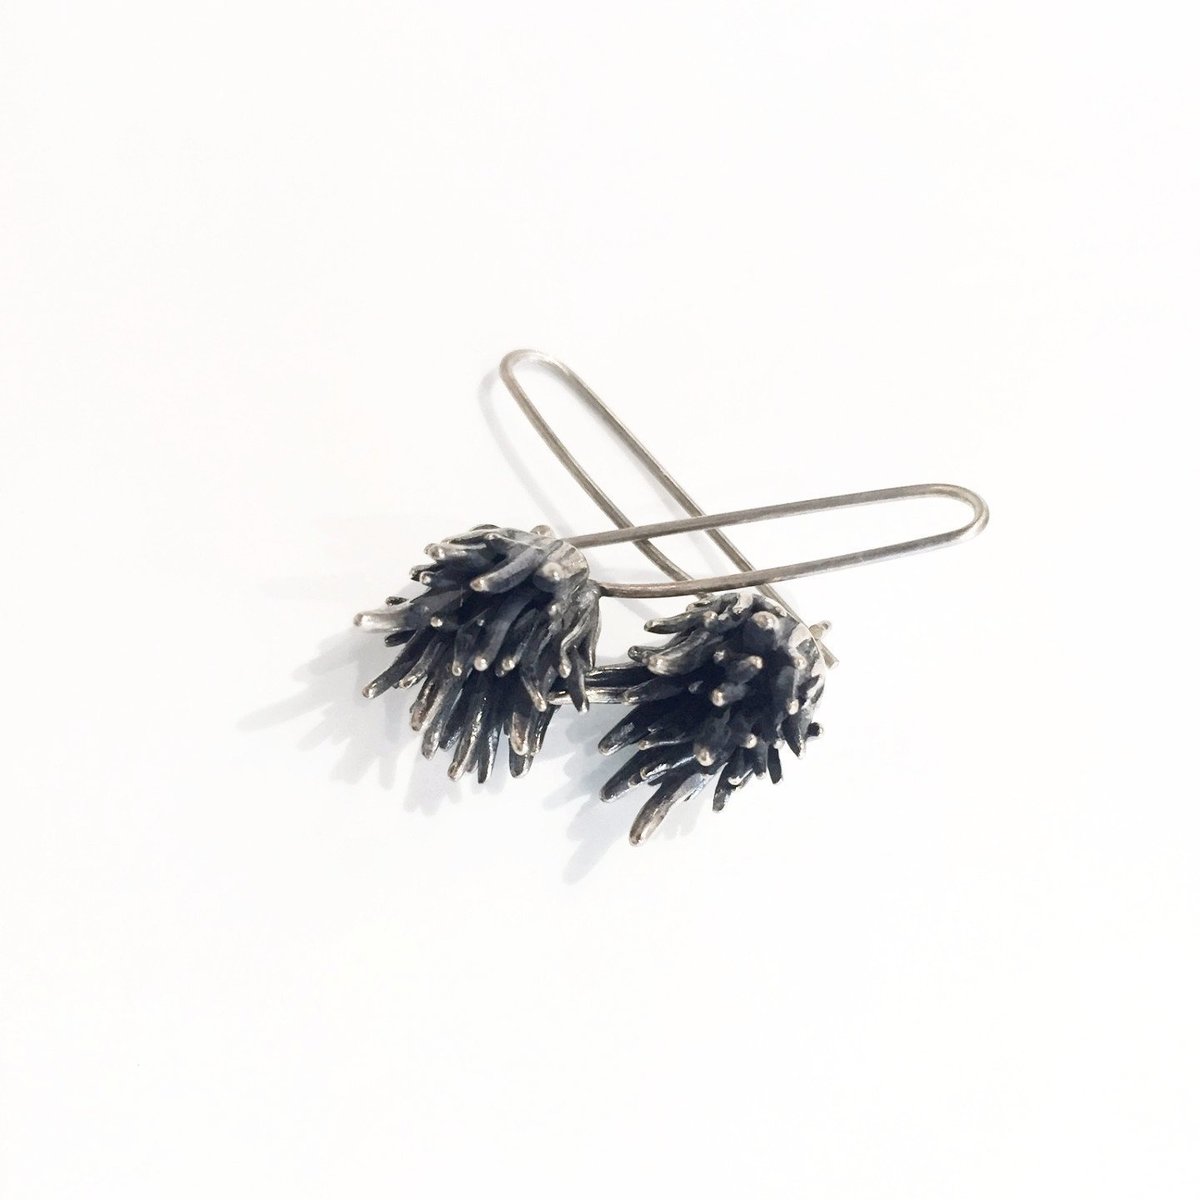 Chee-Me-No - Earrings - Seagrass Dangles - Oxidized Sterling Silver